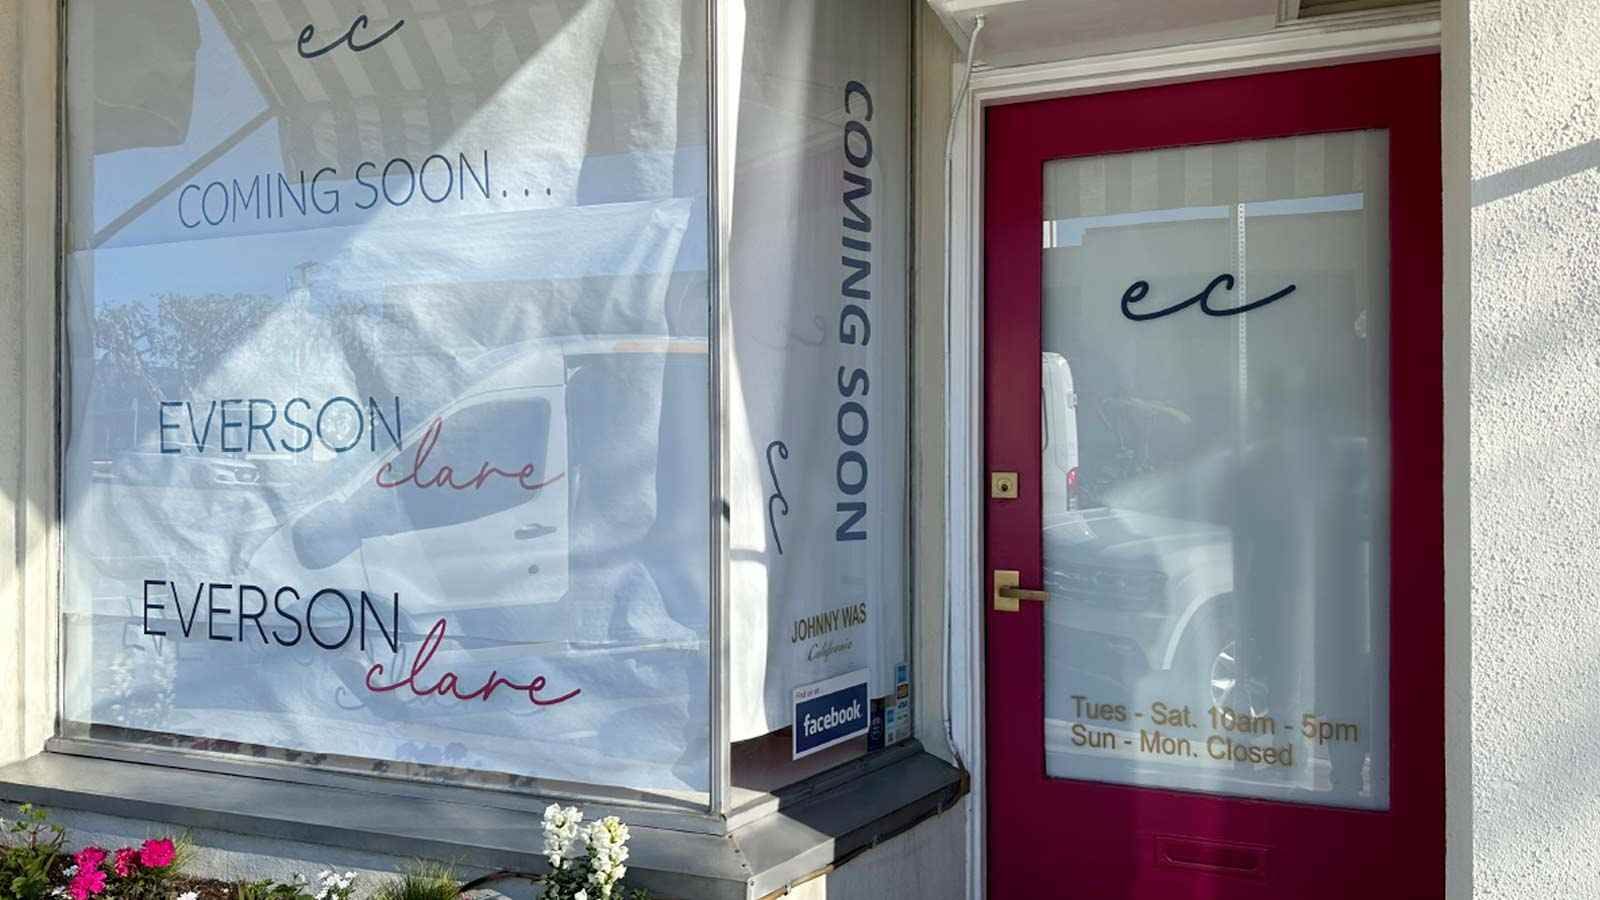 Everson Clare Boutique vinyl lettering on the storefront